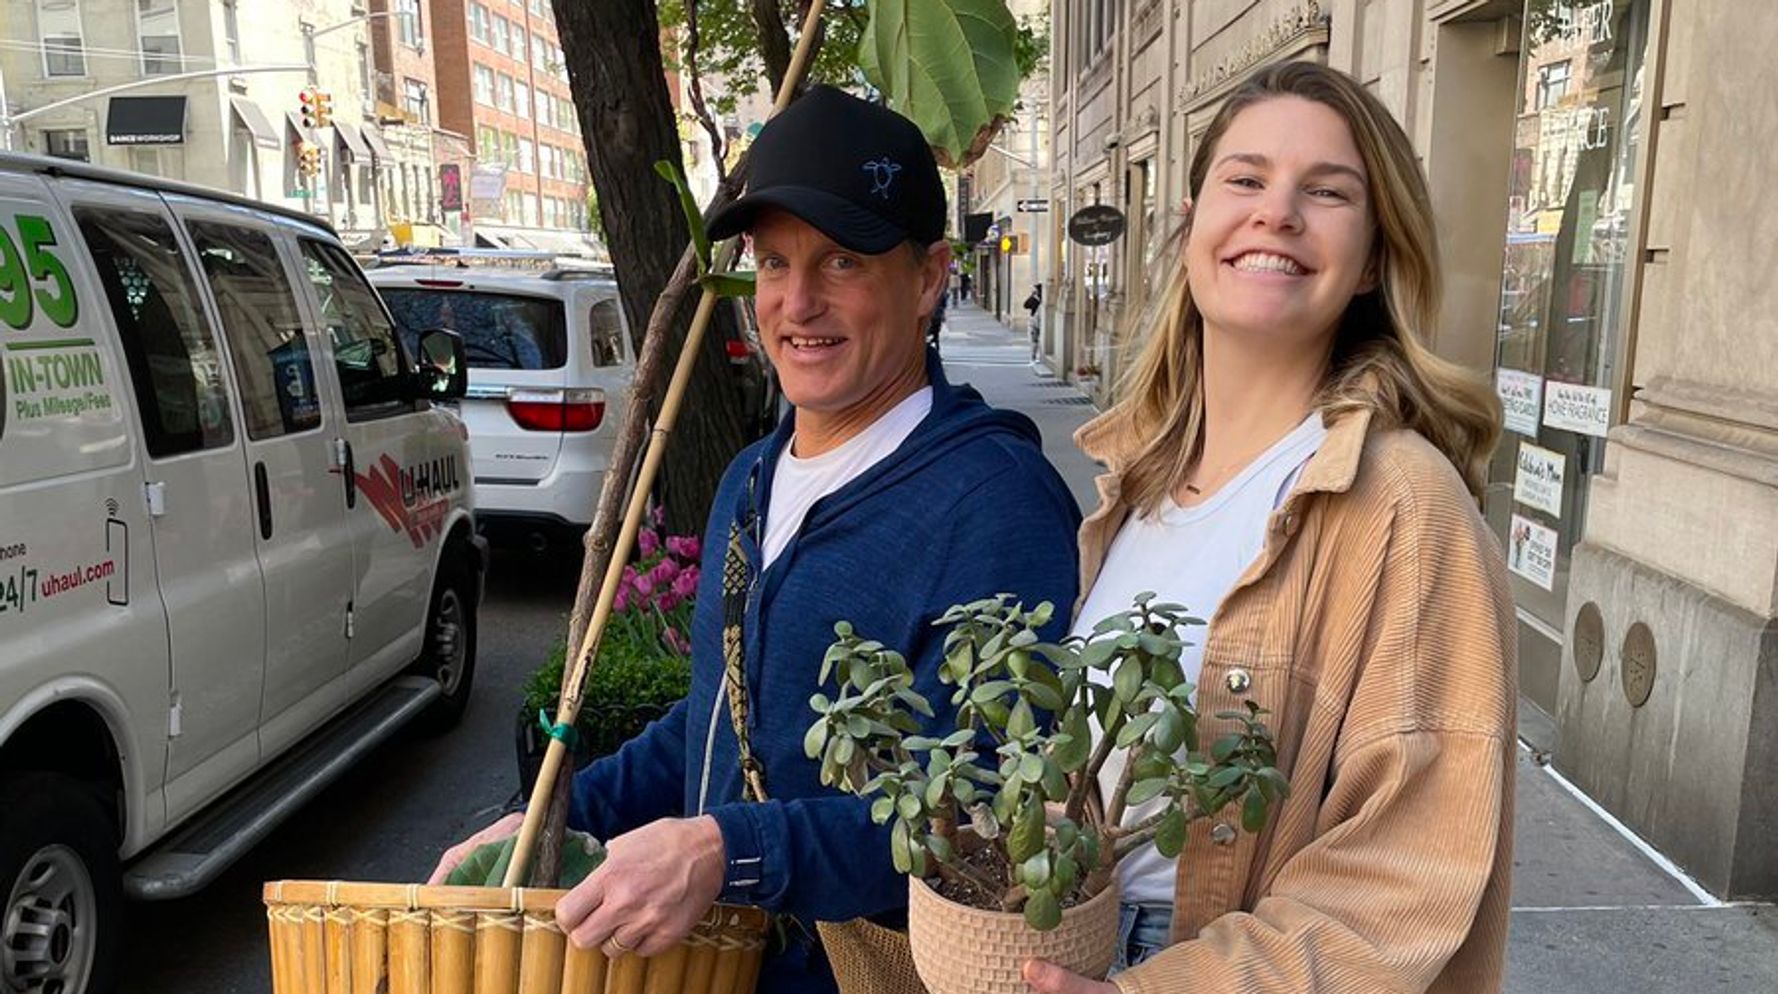 Woody Harrelson ‘Insisted’ On Helping Complete Strangers Move Out Of Apartment